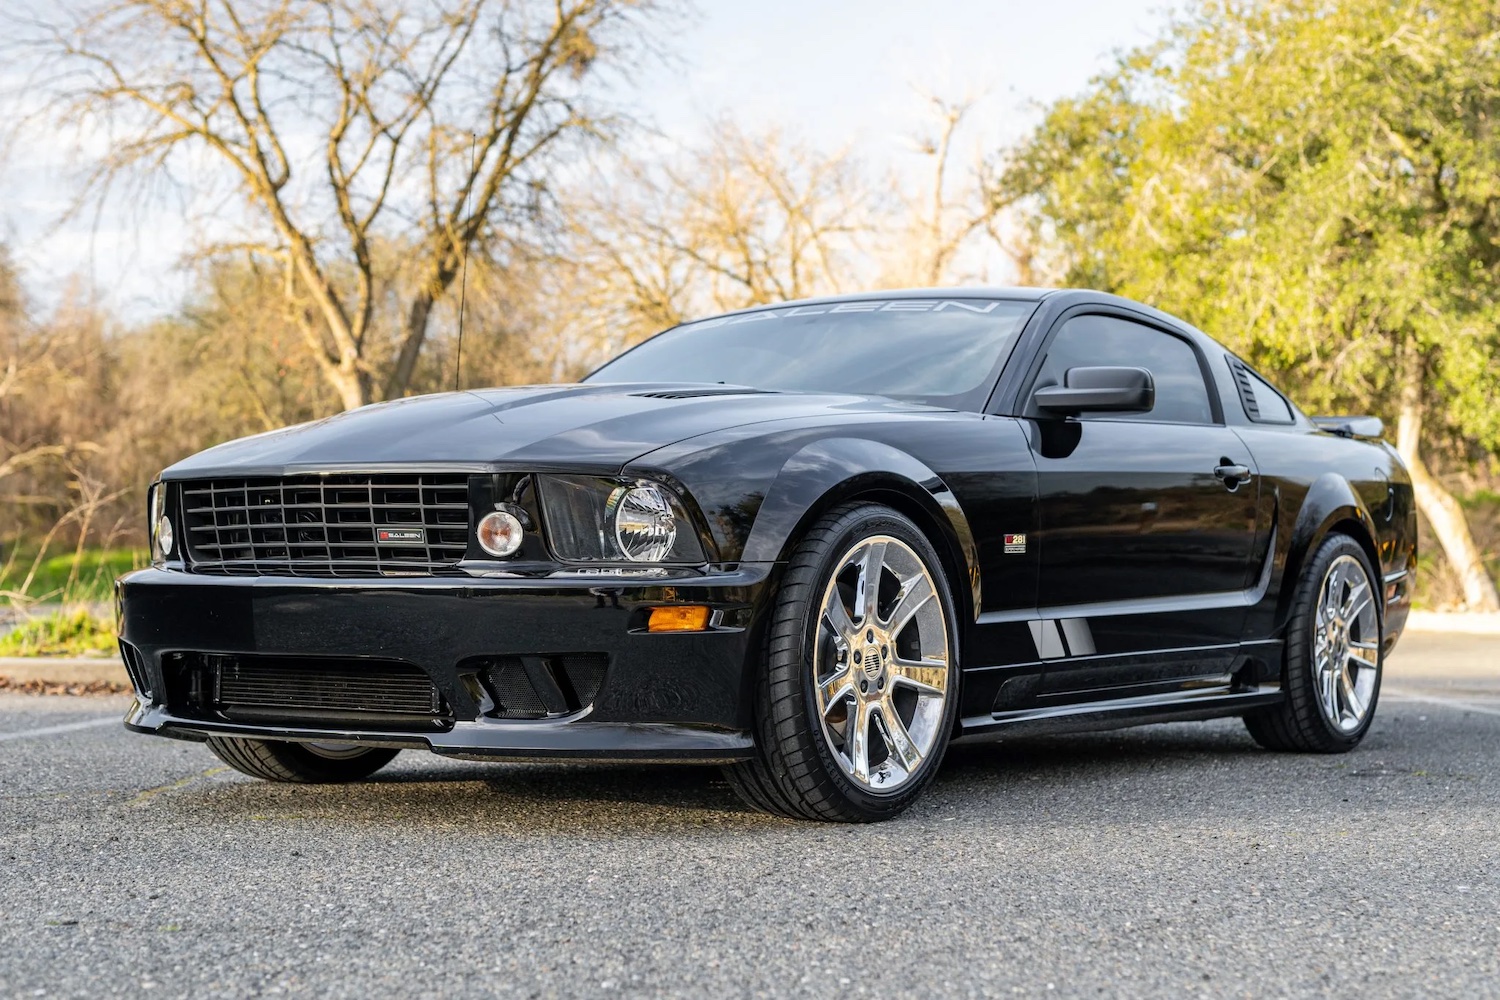 535-Mile 2007 Ford Mustang Saleen S281 Up For Auction